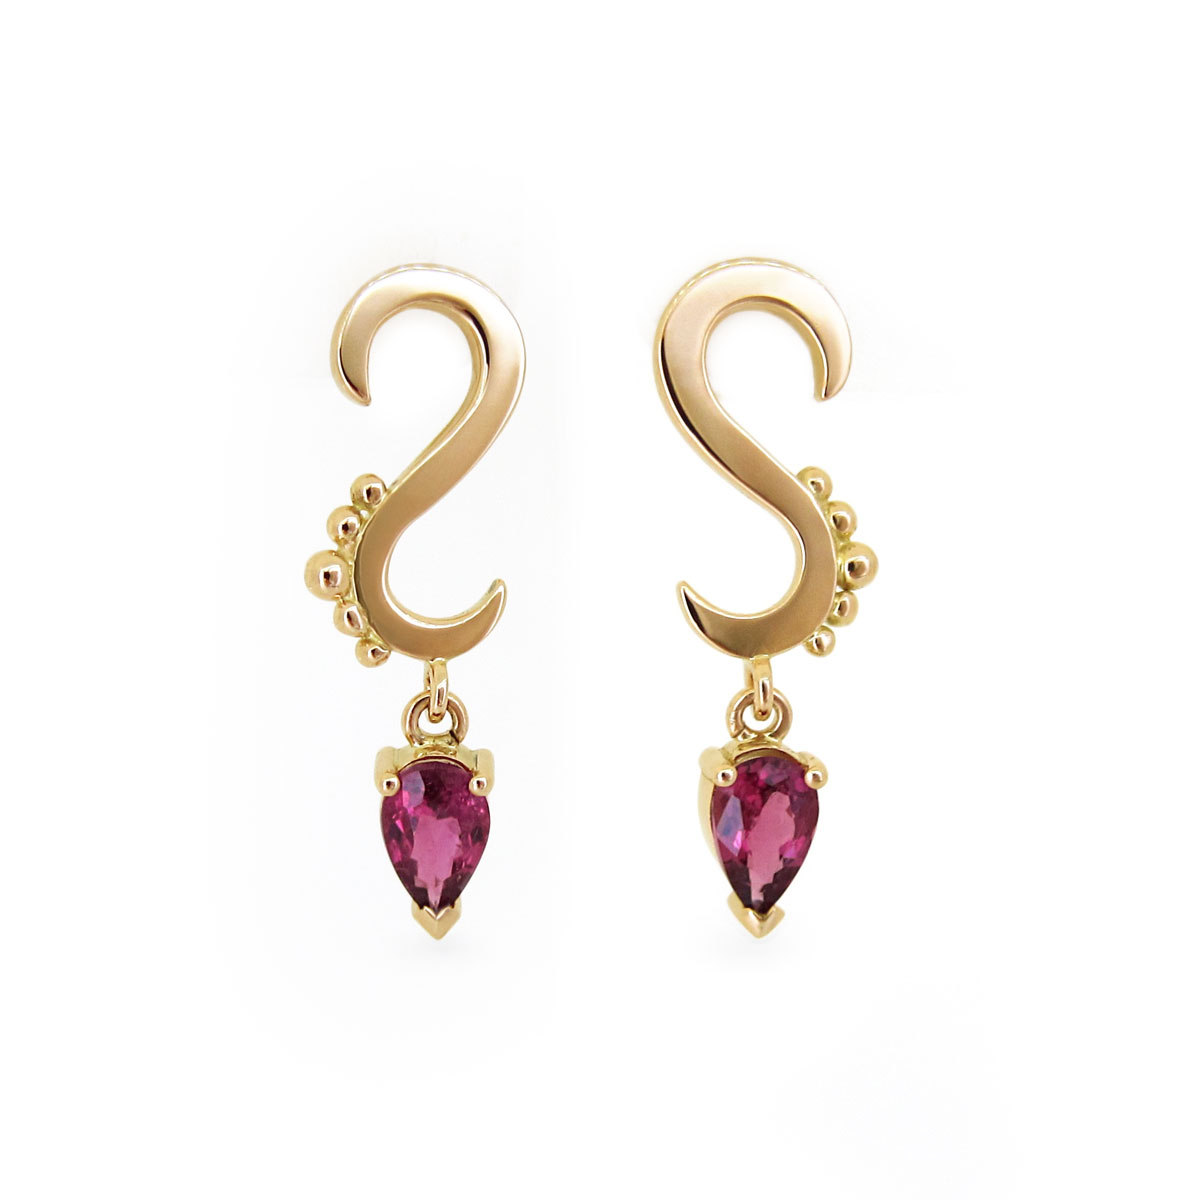 Recycled 22ct gold tourmaline earrings